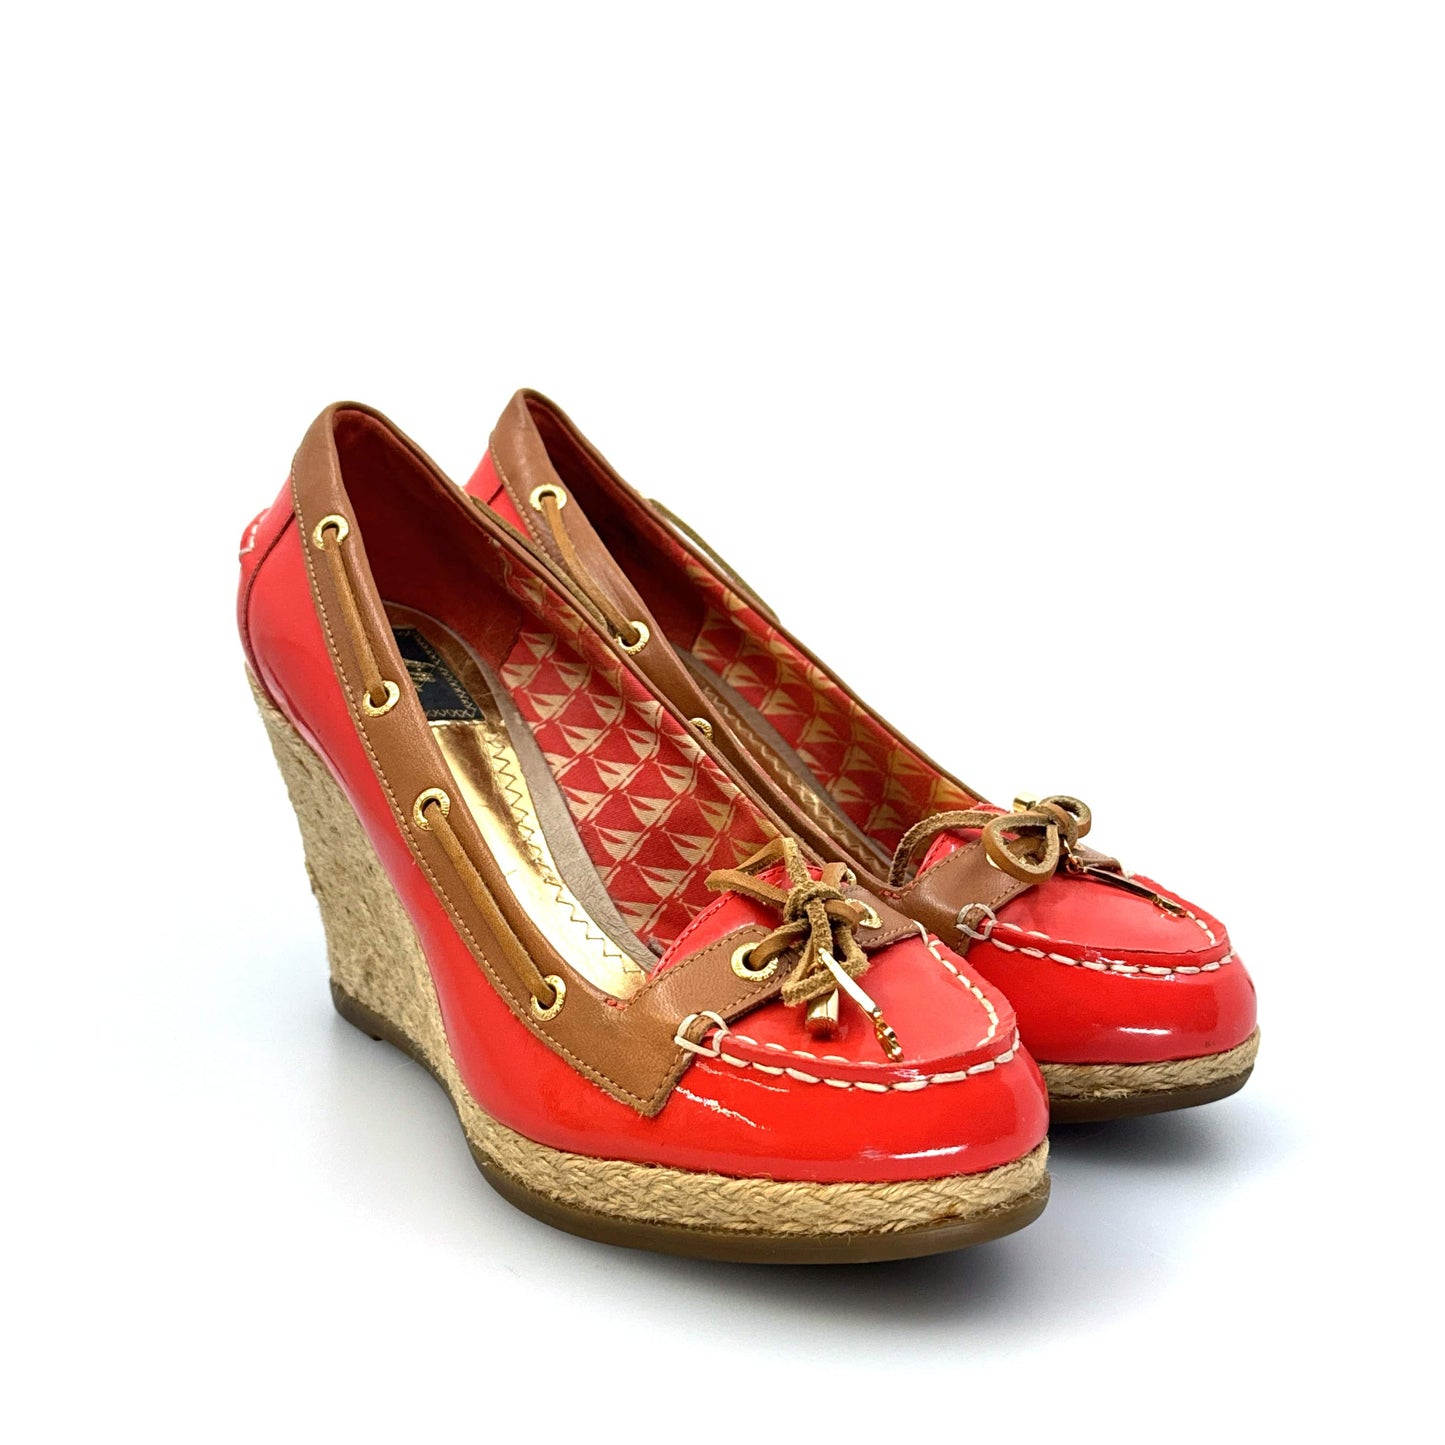 Milly for Sperry Top-Sider Size 7.5M Espadrille Coral Patent Leather Boat Shoes